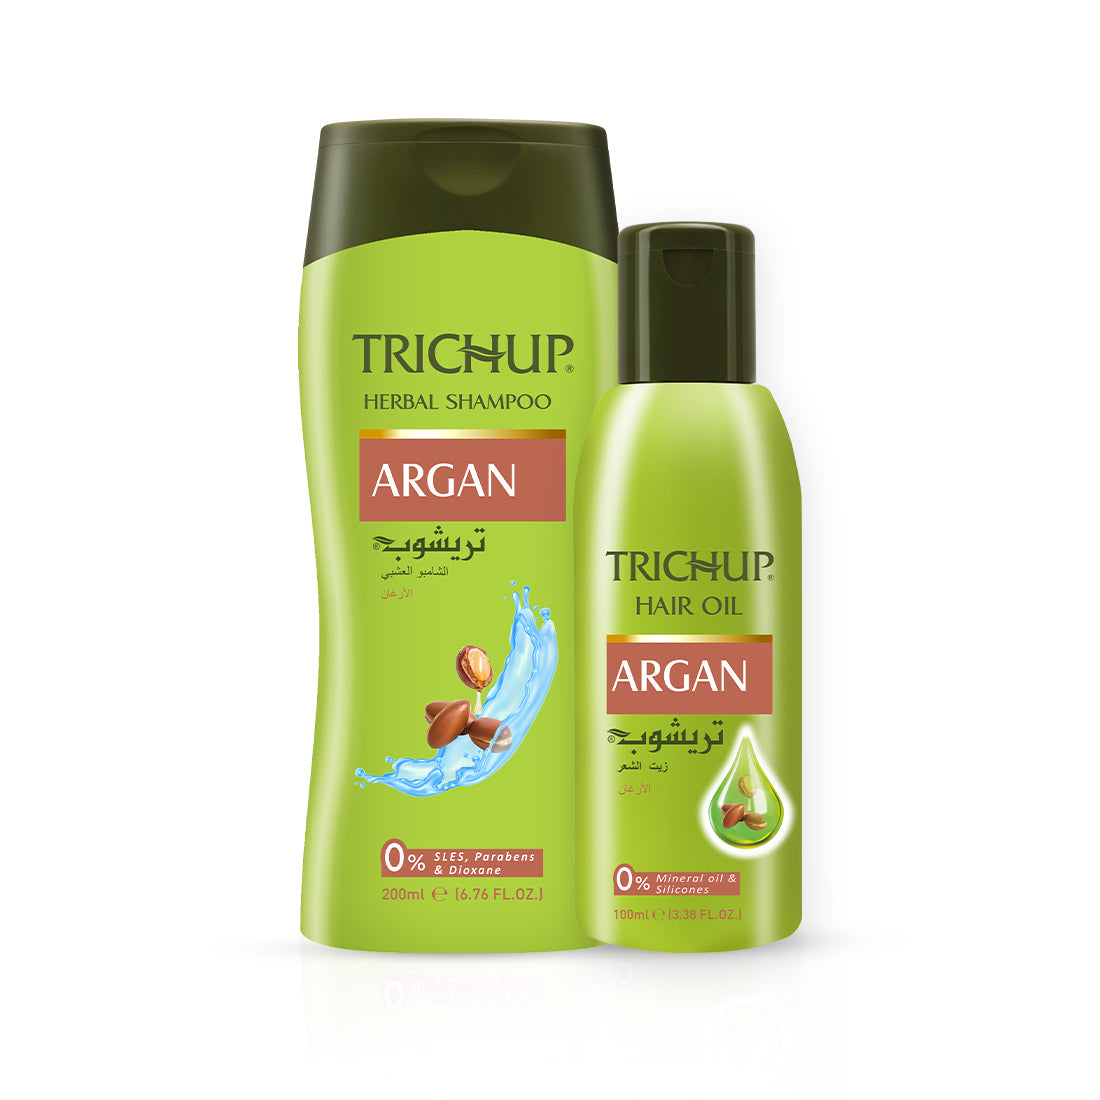 Trichup Argan Oil & Shampoo Kit - Blends with Moroccan Argan Oil - Helps Reduce Frizz From Your Hair & Boosts Shine - Gives Silky, Soft & Manageable Hair - VasuStore